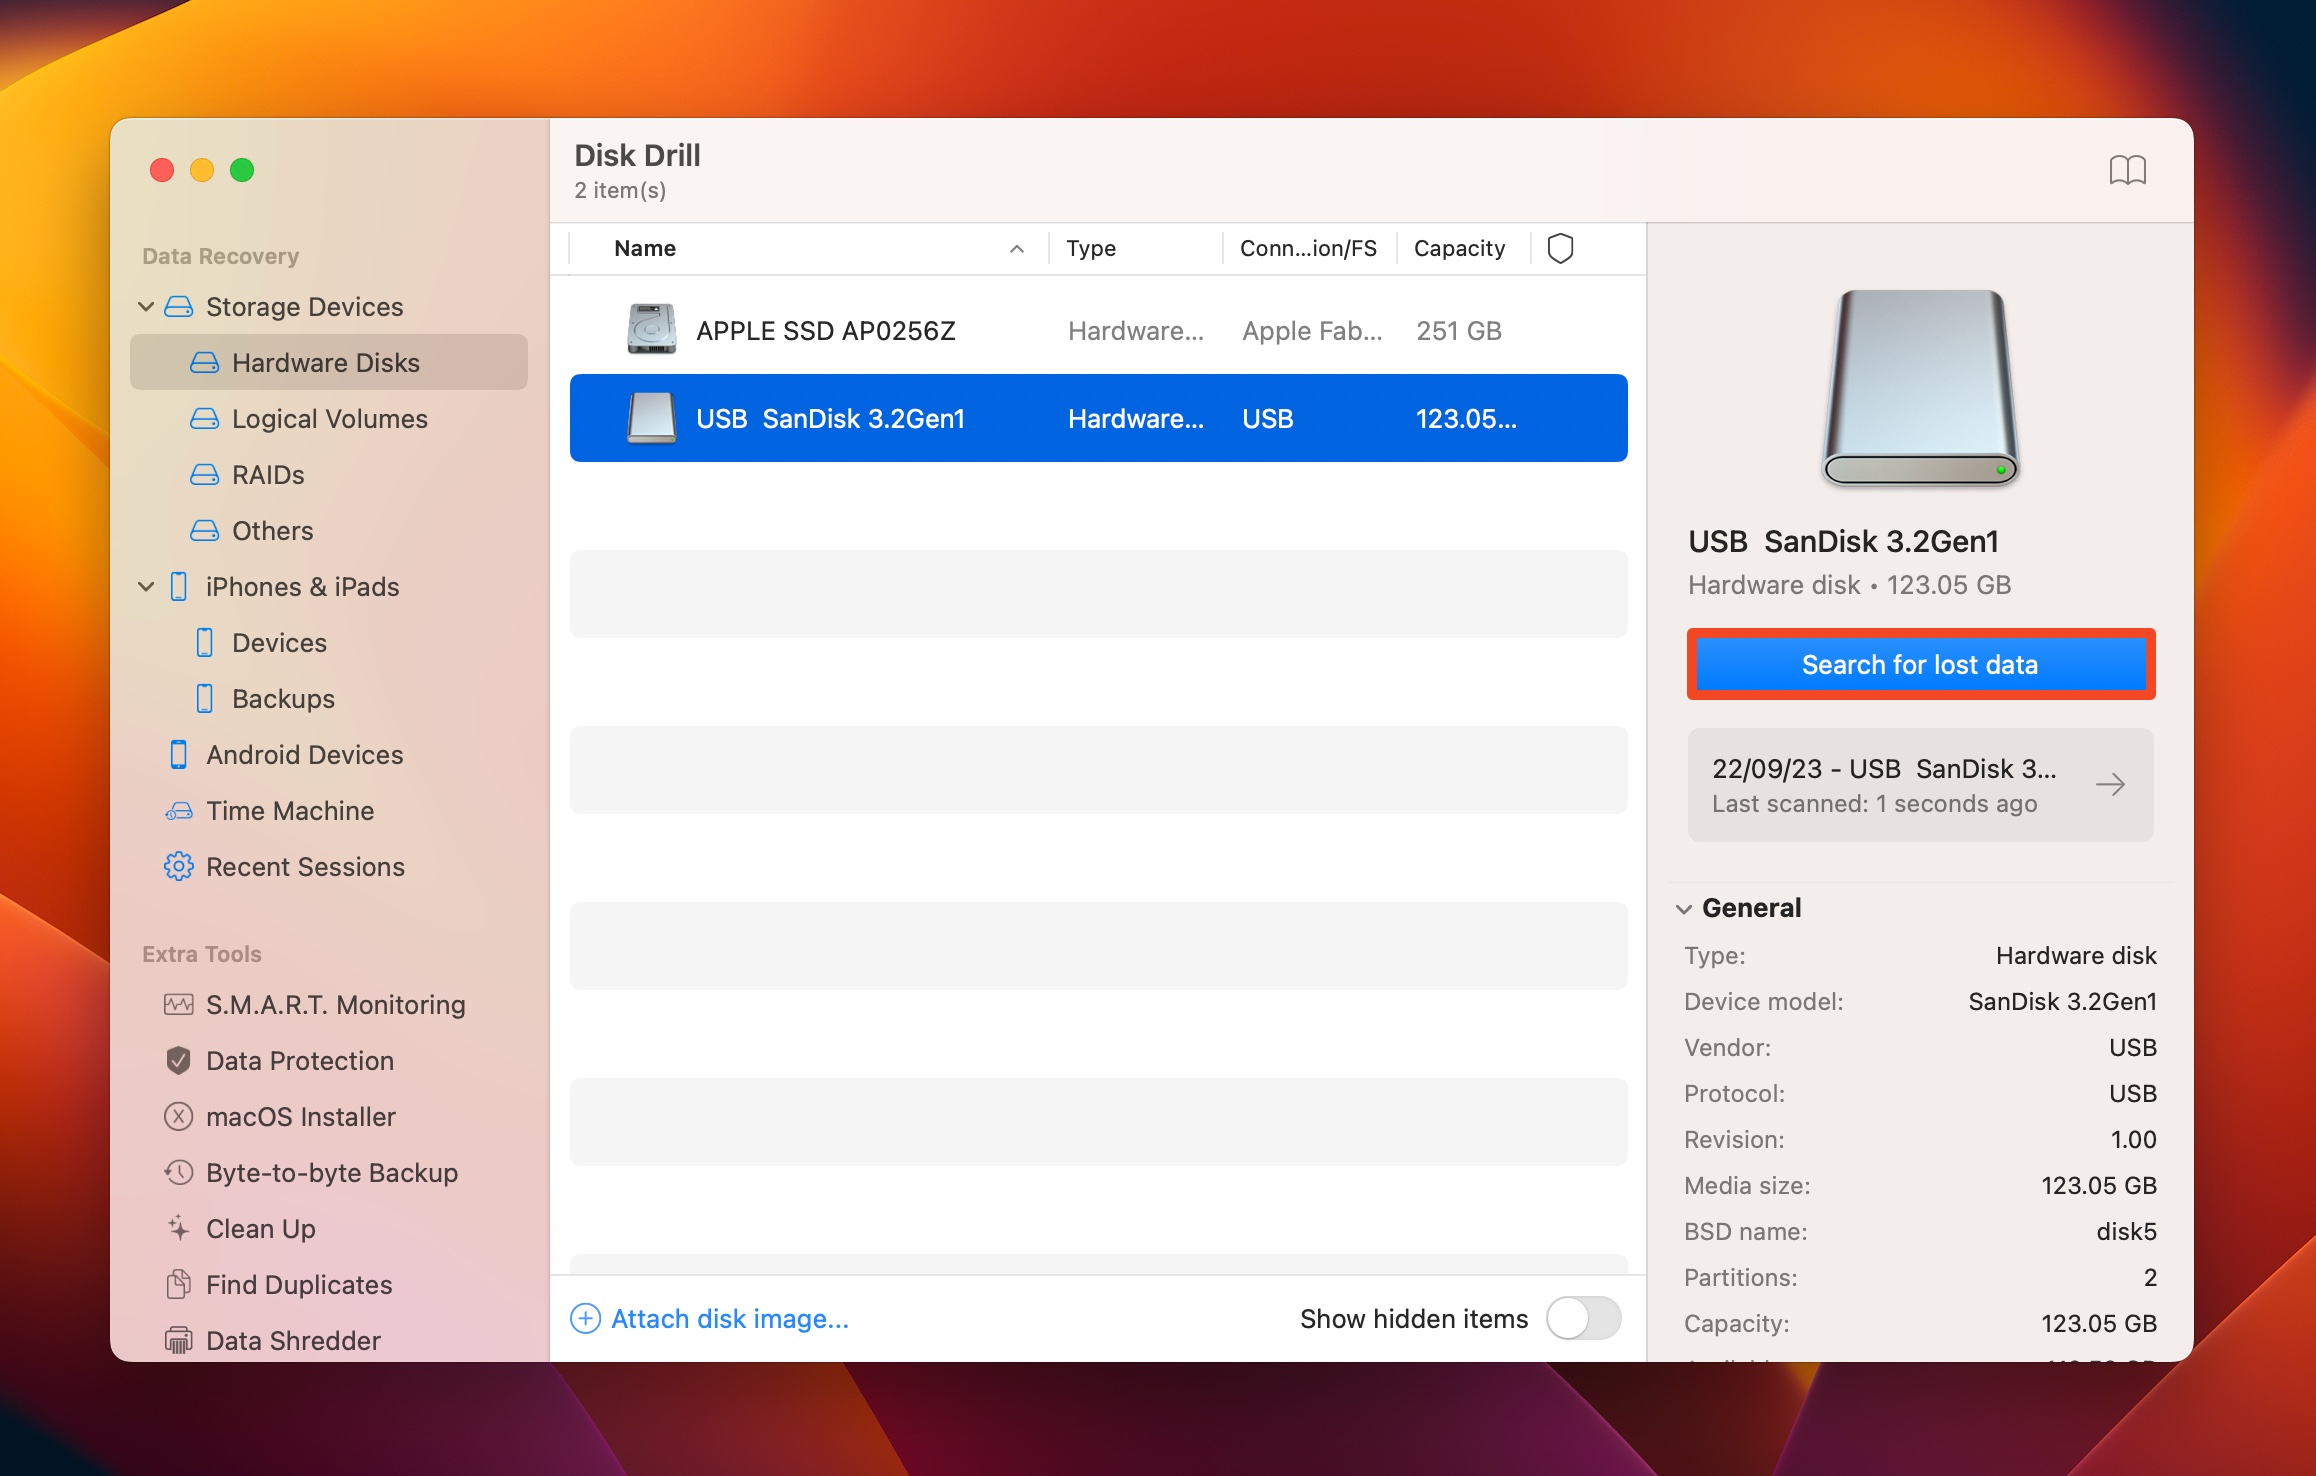 Search for lost data in macOS.